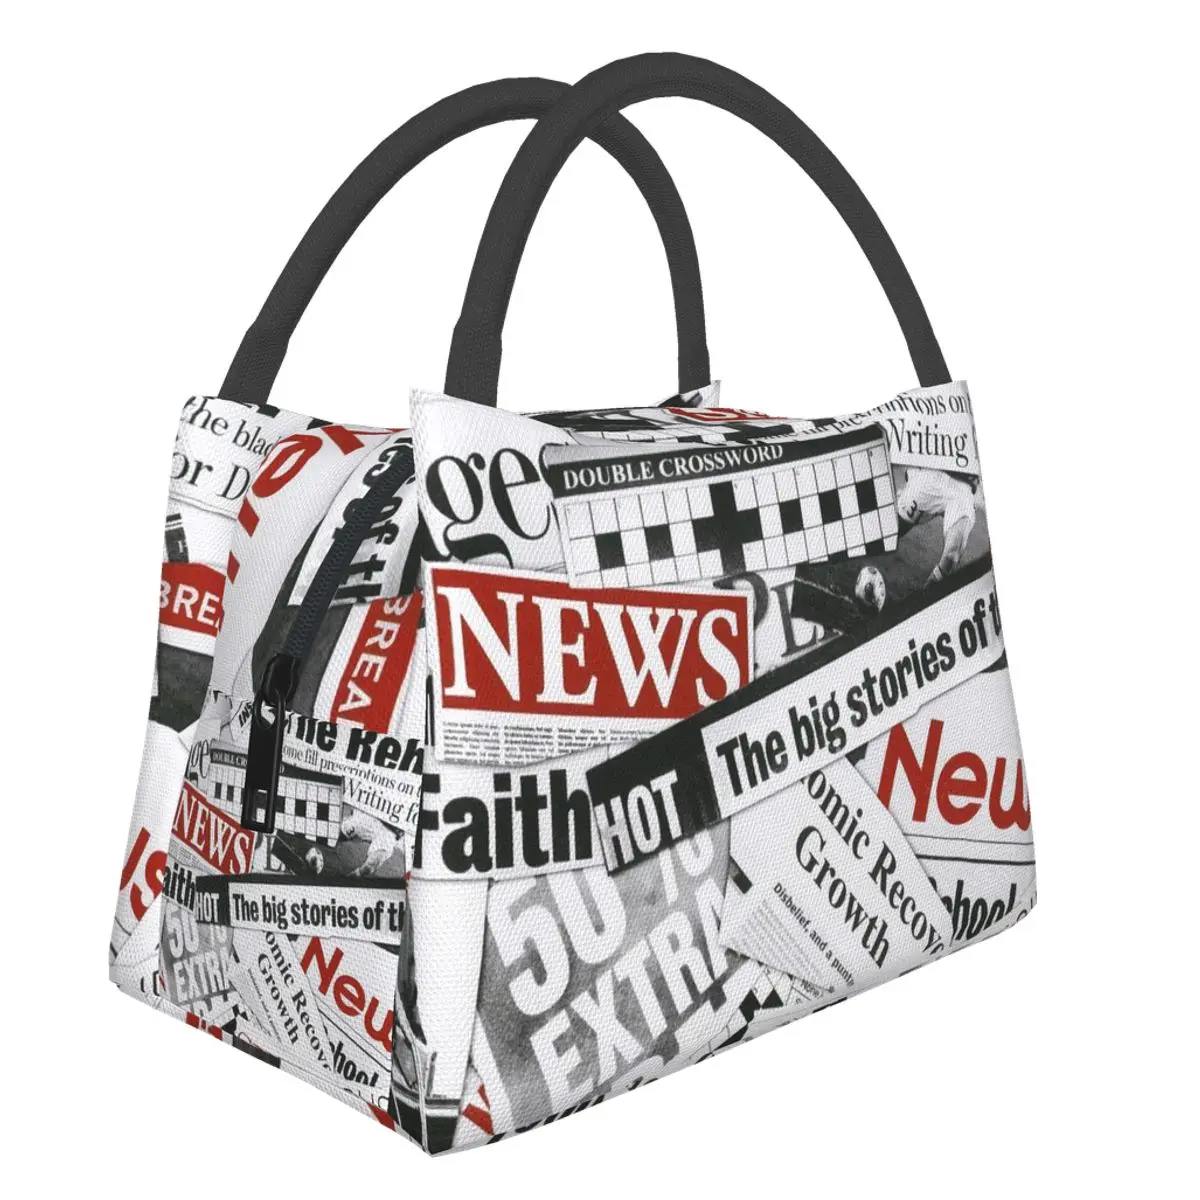 Portable Lunch Bag Newspaper Pattern Print Thermal Insulated Lunch Box Tote Cooler Handbag Bento Dinner Container School Storage new portable bag lunch lunch food bento insulated lunch cooler storage container bag pouch box bags tote school thermal new ther